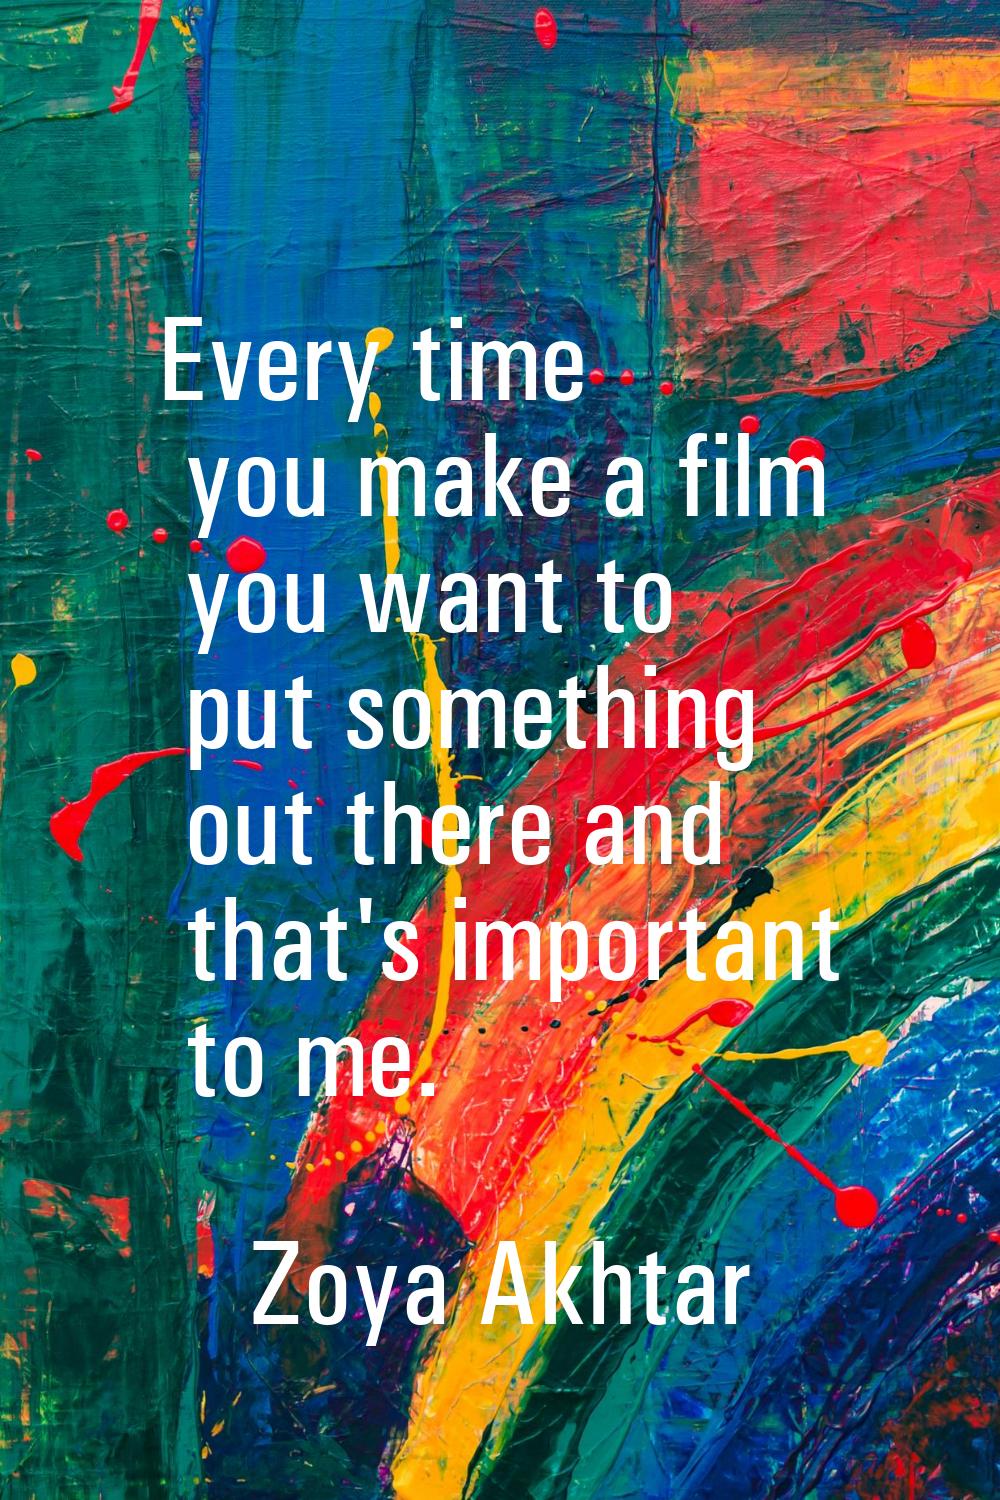 Every time you make a film you want to put something out there and that's important to me.